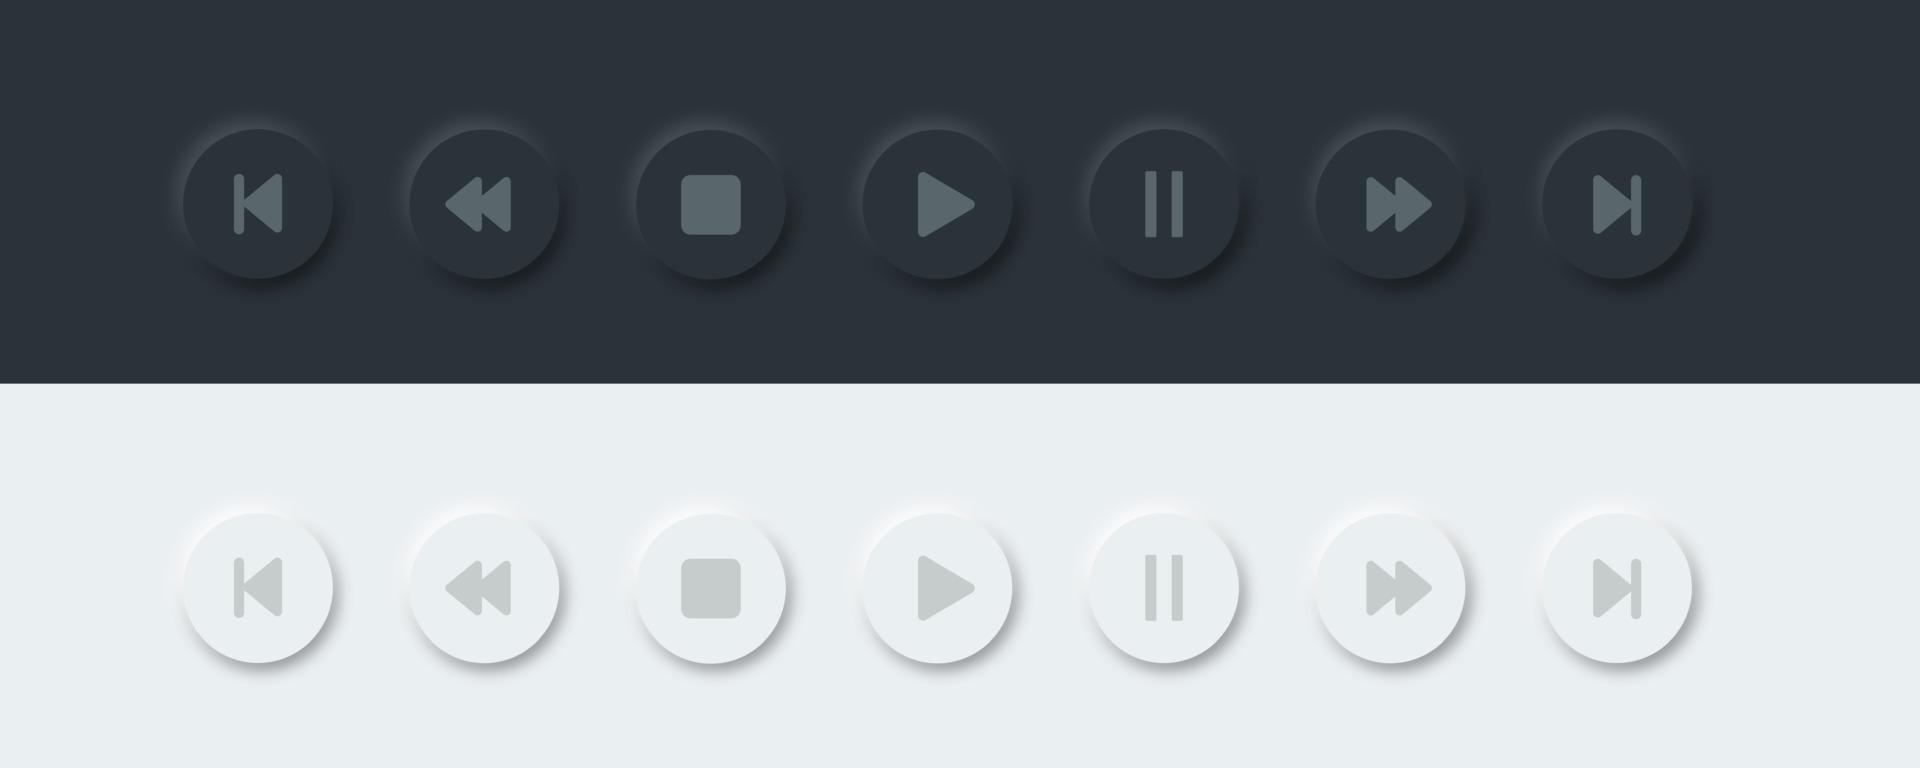 Media player buttons icon set. Neomorphism design style. Vector illustration EPS 10.